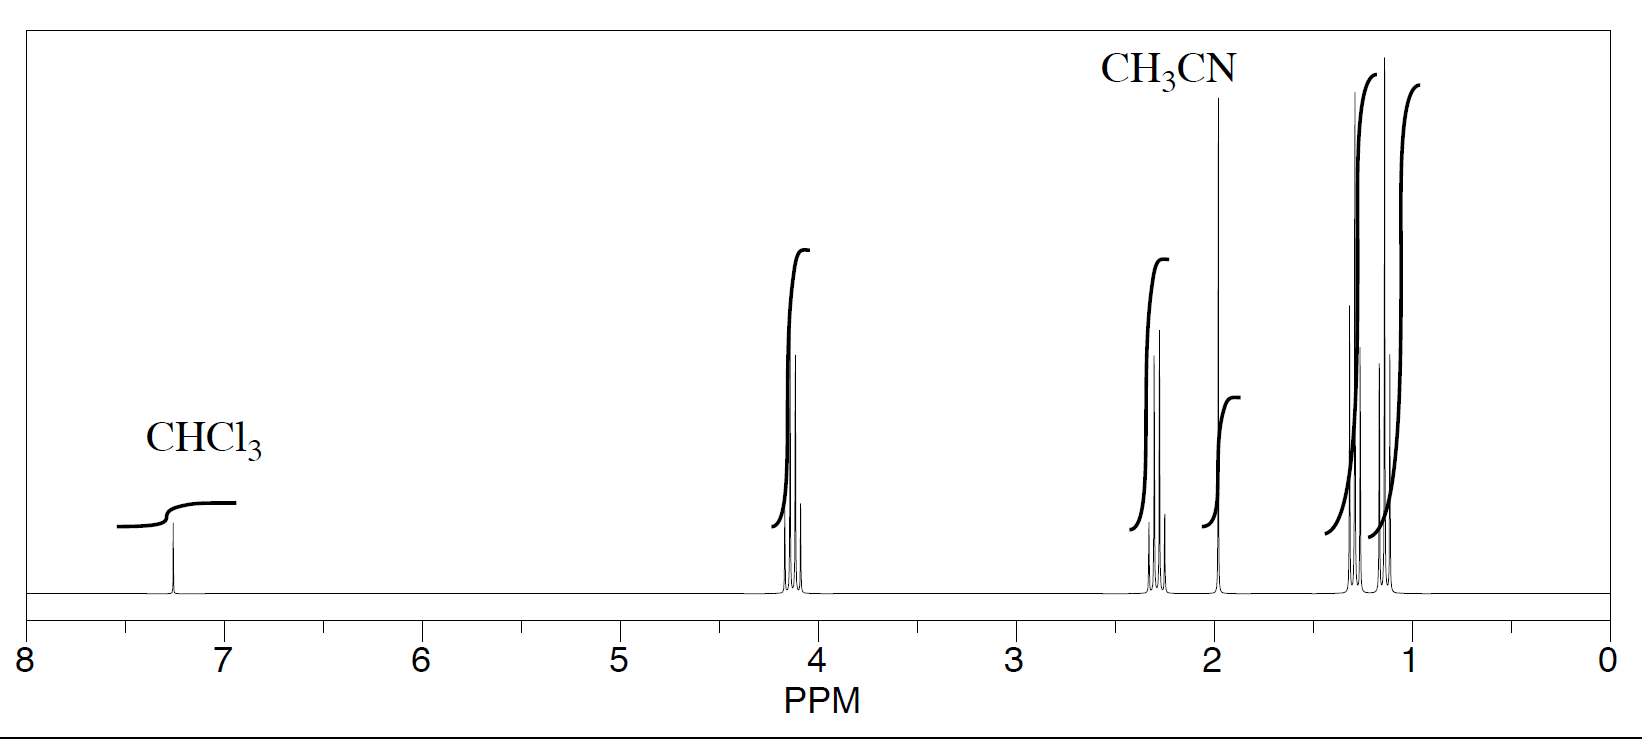 There are six peaks on the H-NMR spectrum at 1.2, 1.4, 2,2.3,4.1, and 7.3 ppm.